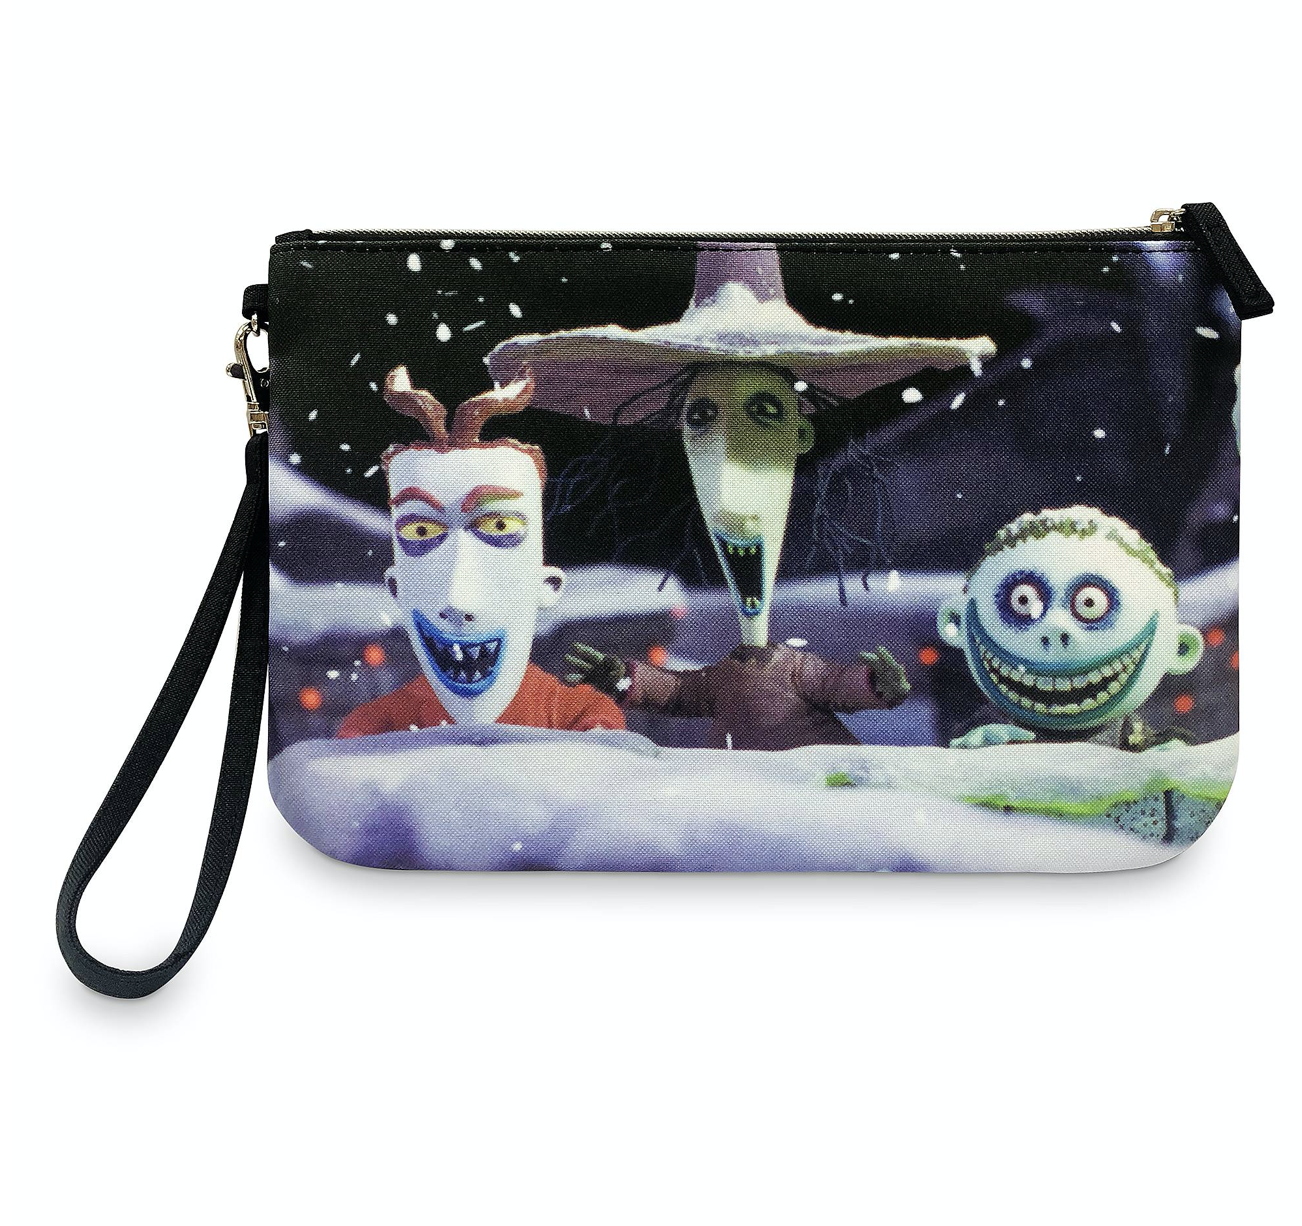 Disney The Nightmare Before Christmas Cosmetics Bag Oh My Disney New with Tags